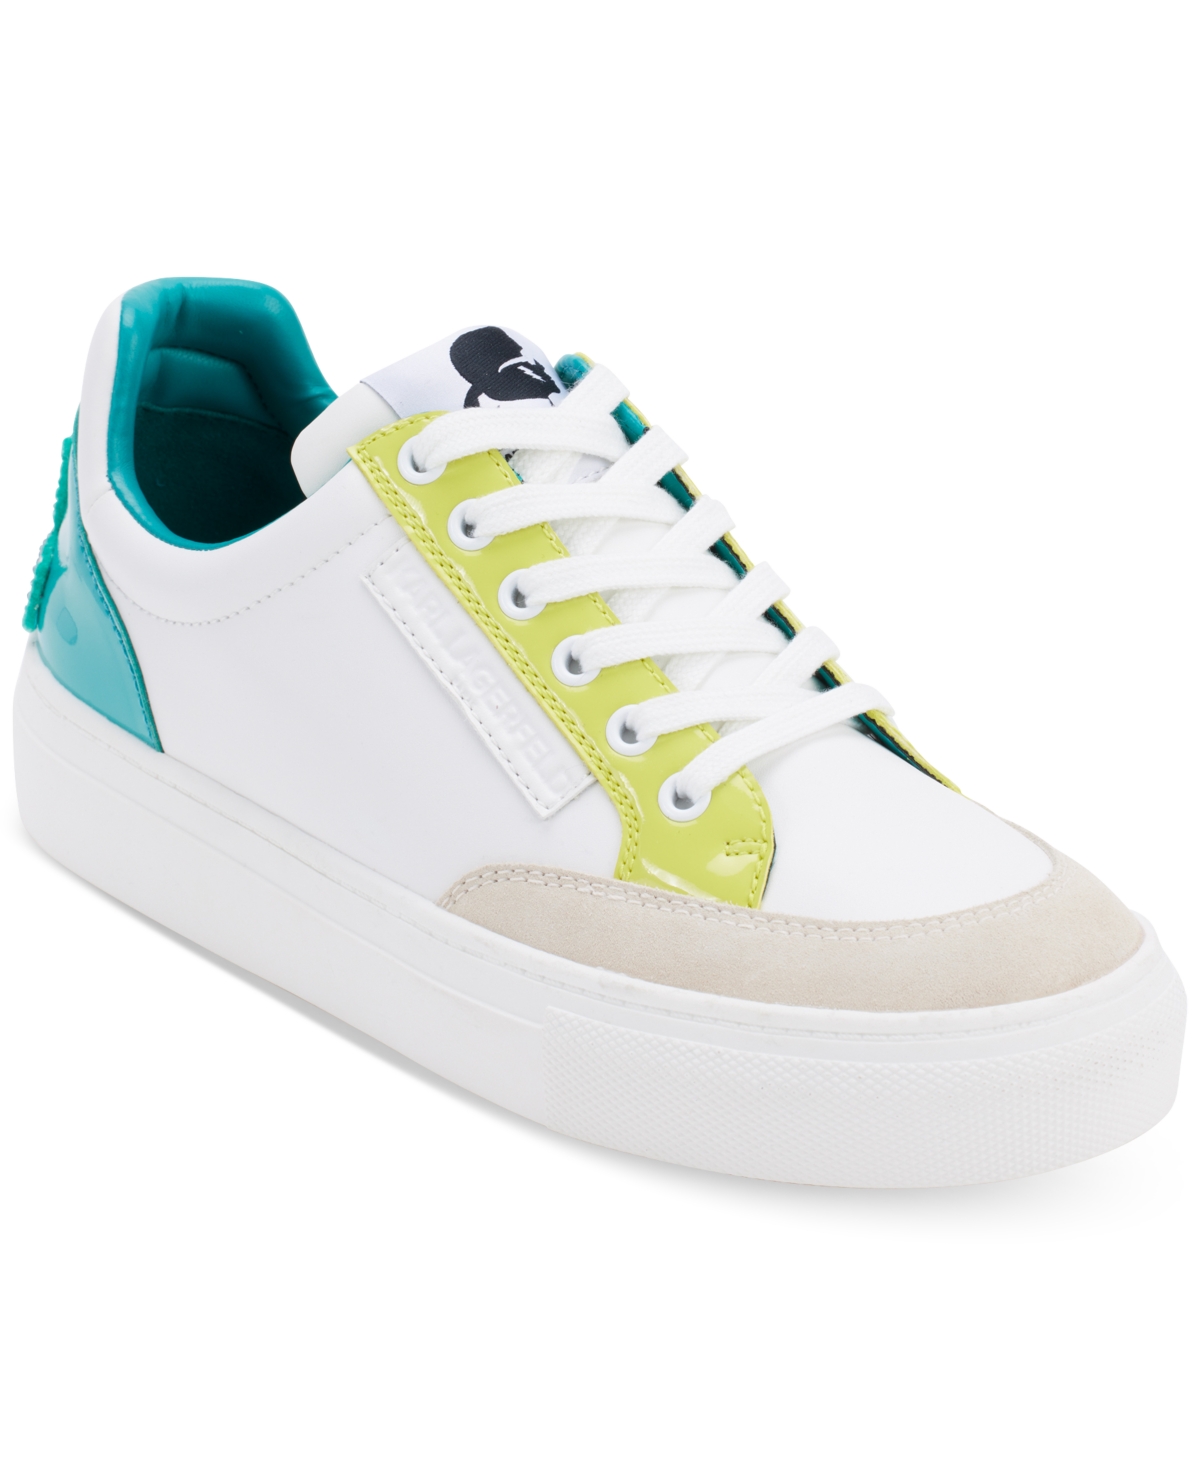 Women's Calico Patch Embellished-Heel Sneakers - Bright White